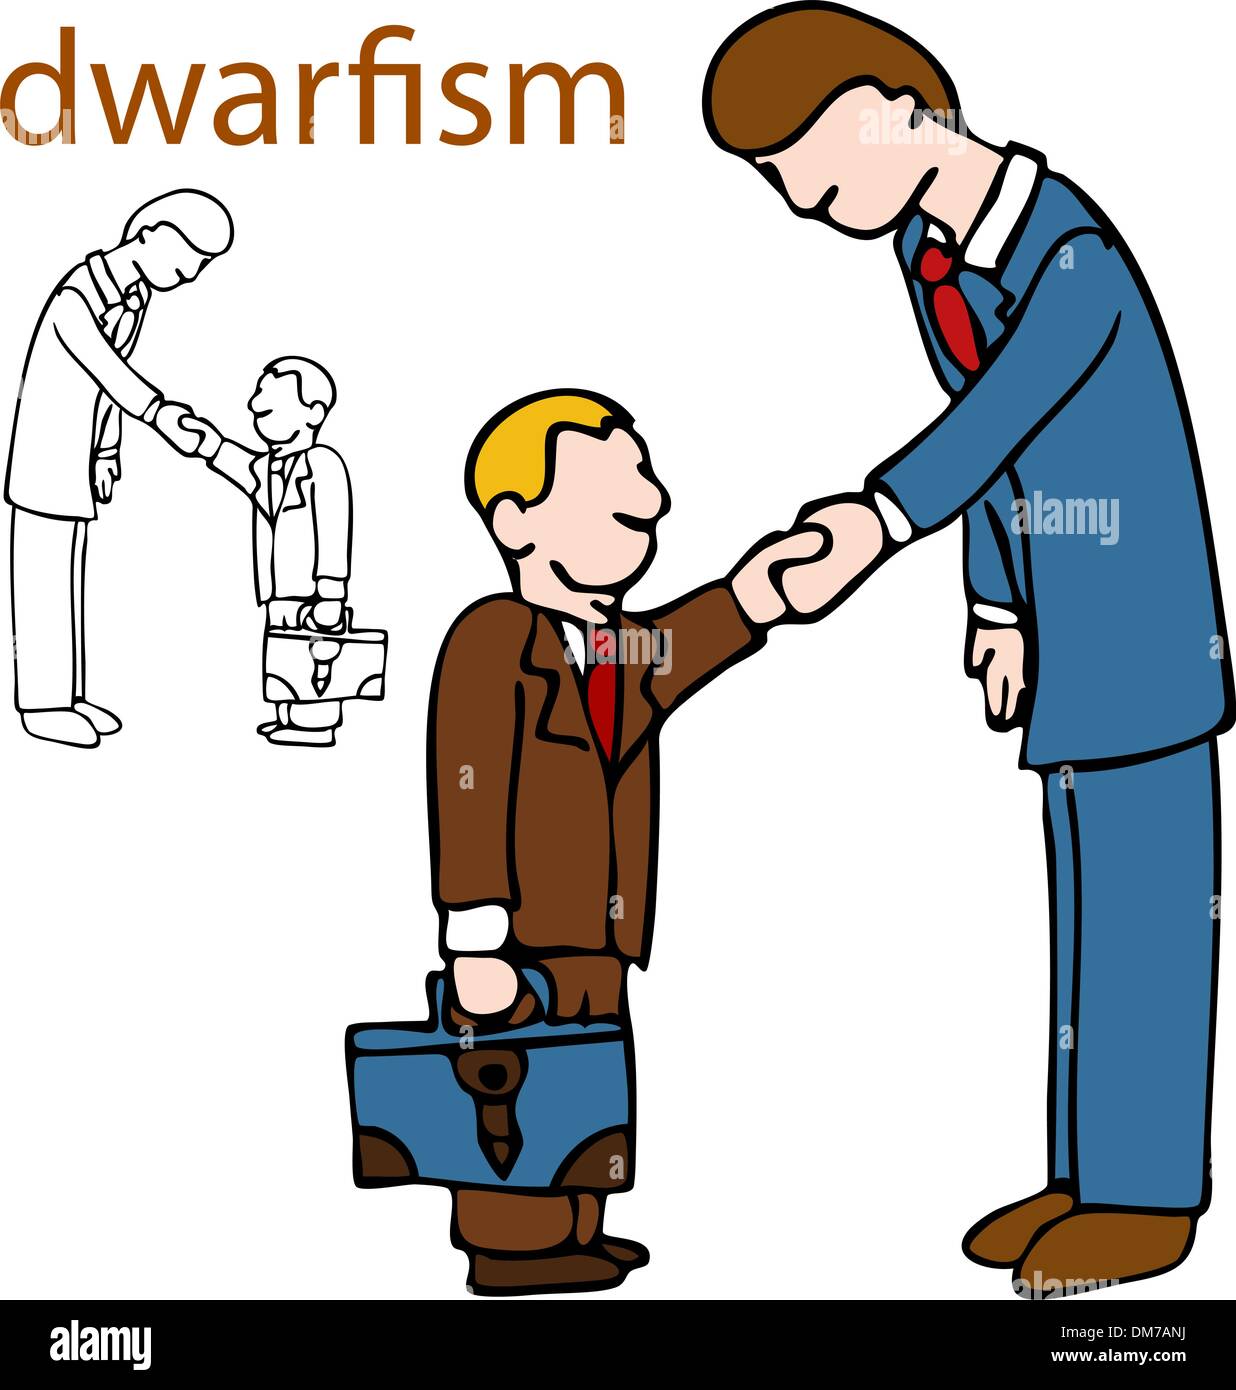 Dwarfism Stock Vector